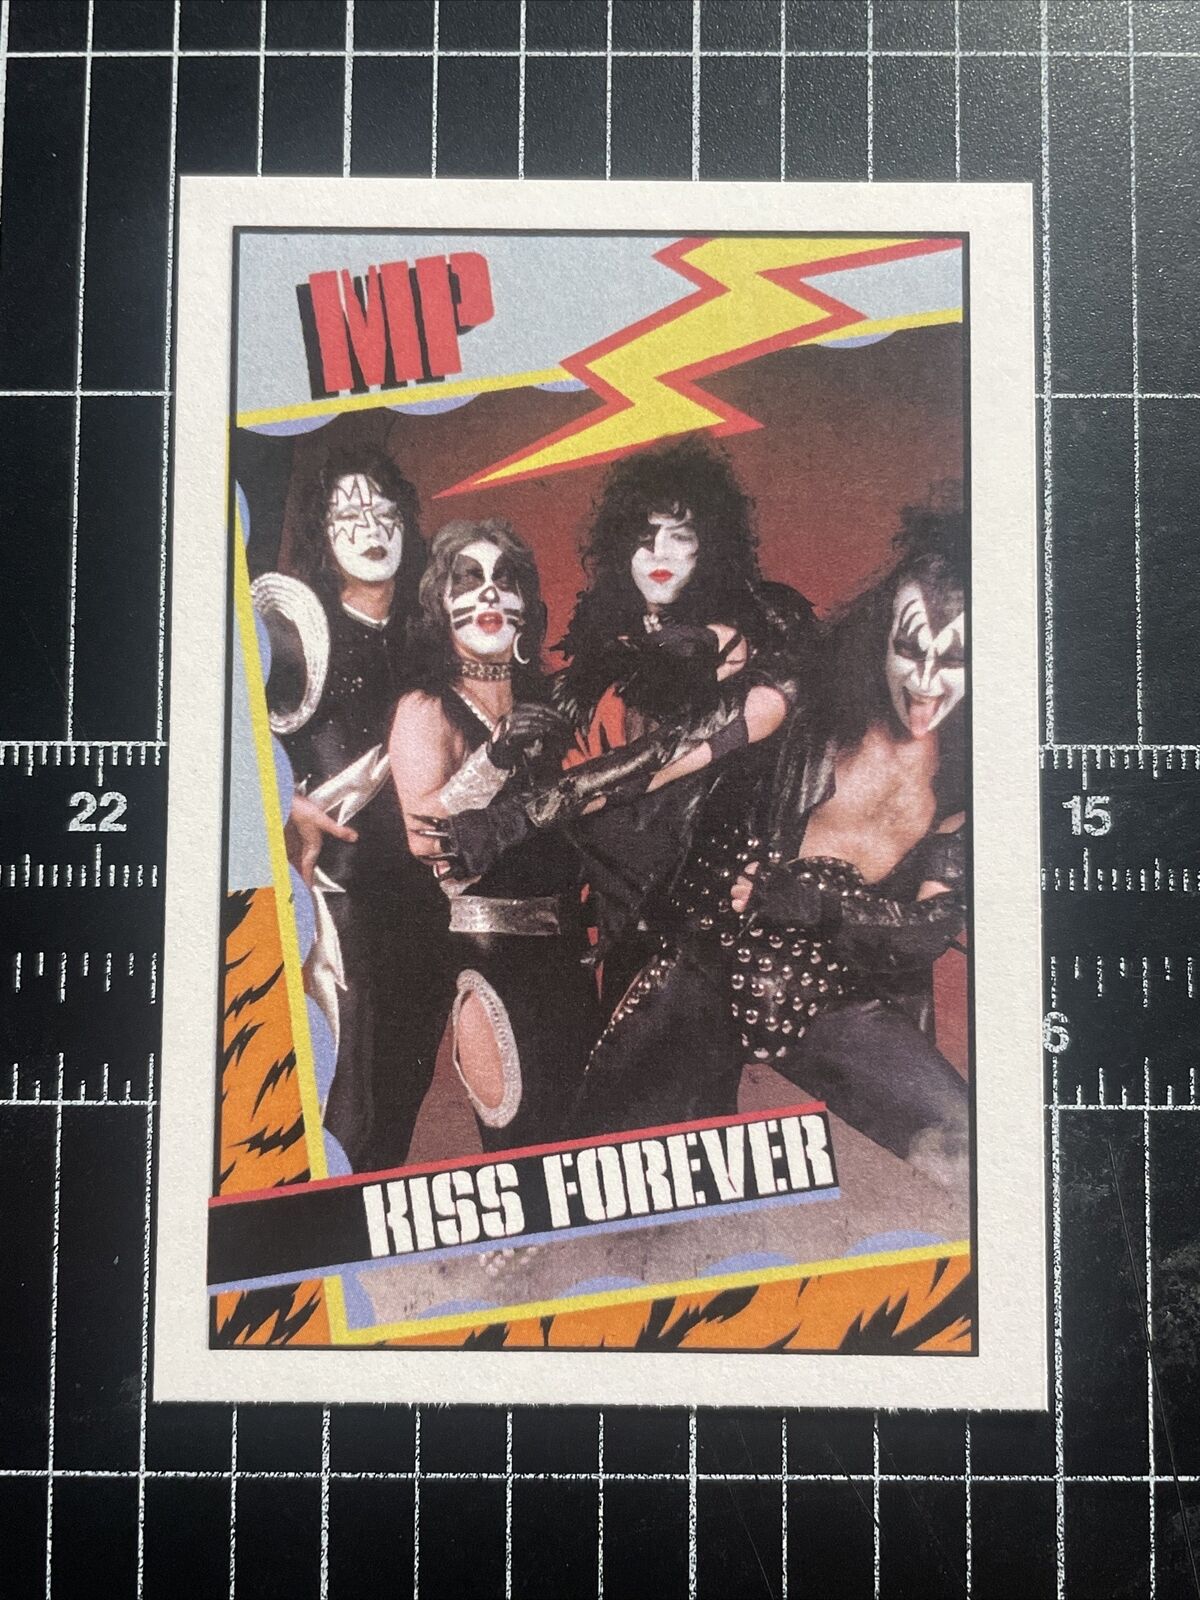 Kiss Forever Rock Band Custom Wrestling Style Trading Card By MPRINTS